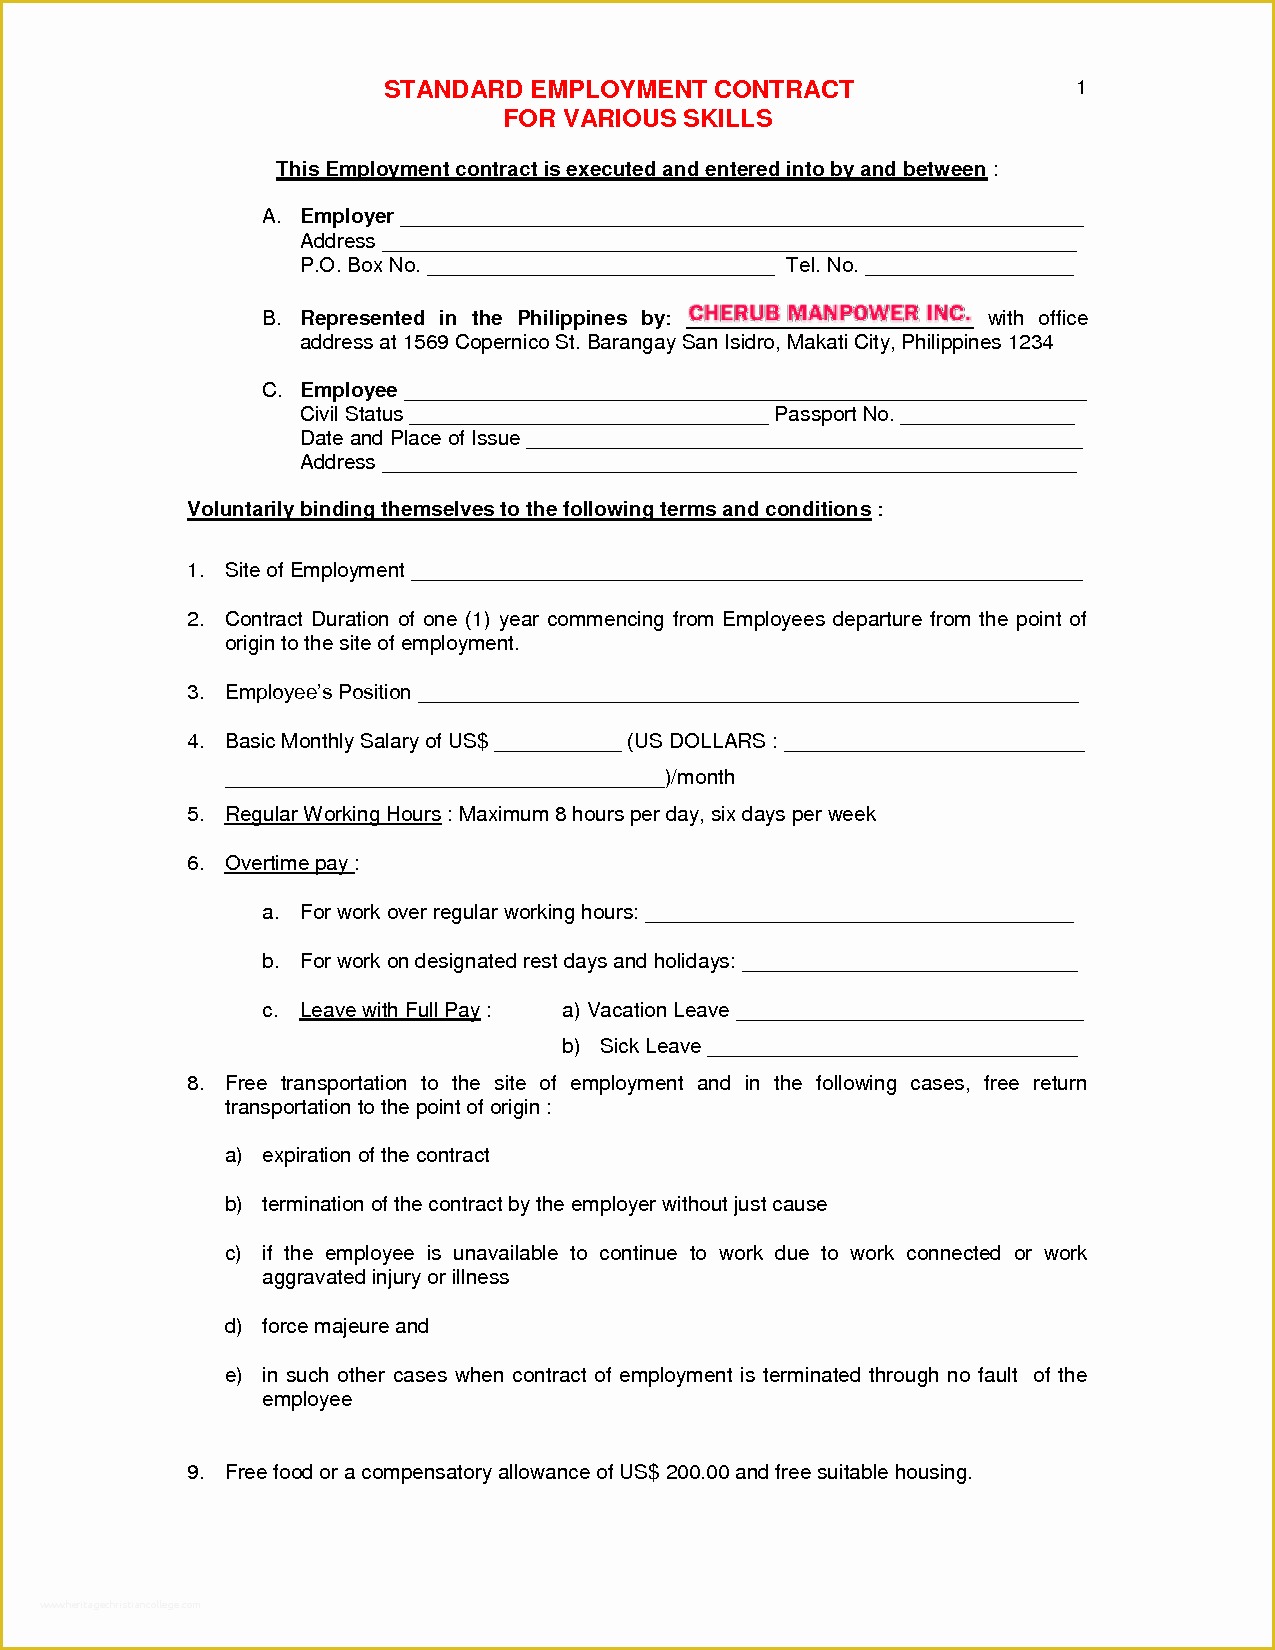 Job Templates Free Download Of Free Employment Contract Agreement Template Image Gallery